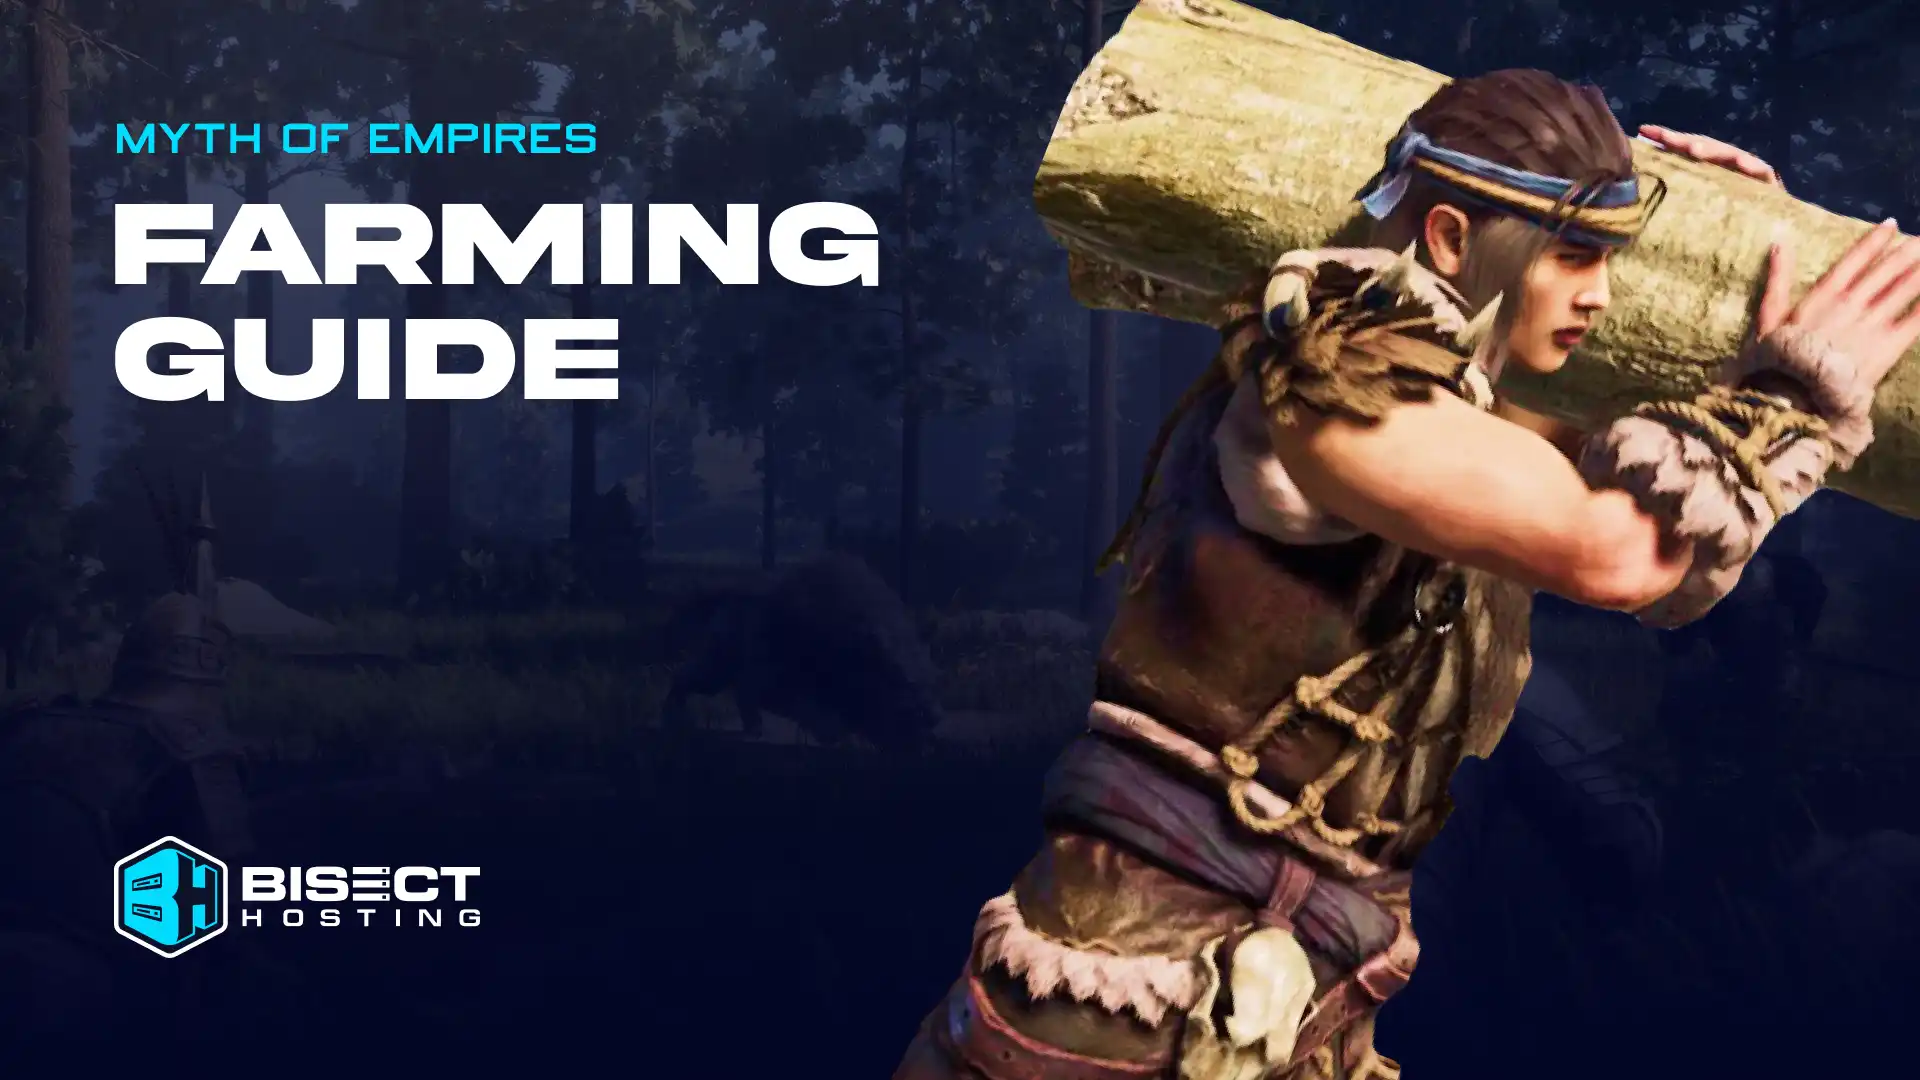 Myth of Empires Farming Guide: How to Start a Farm, Water Crops, & More